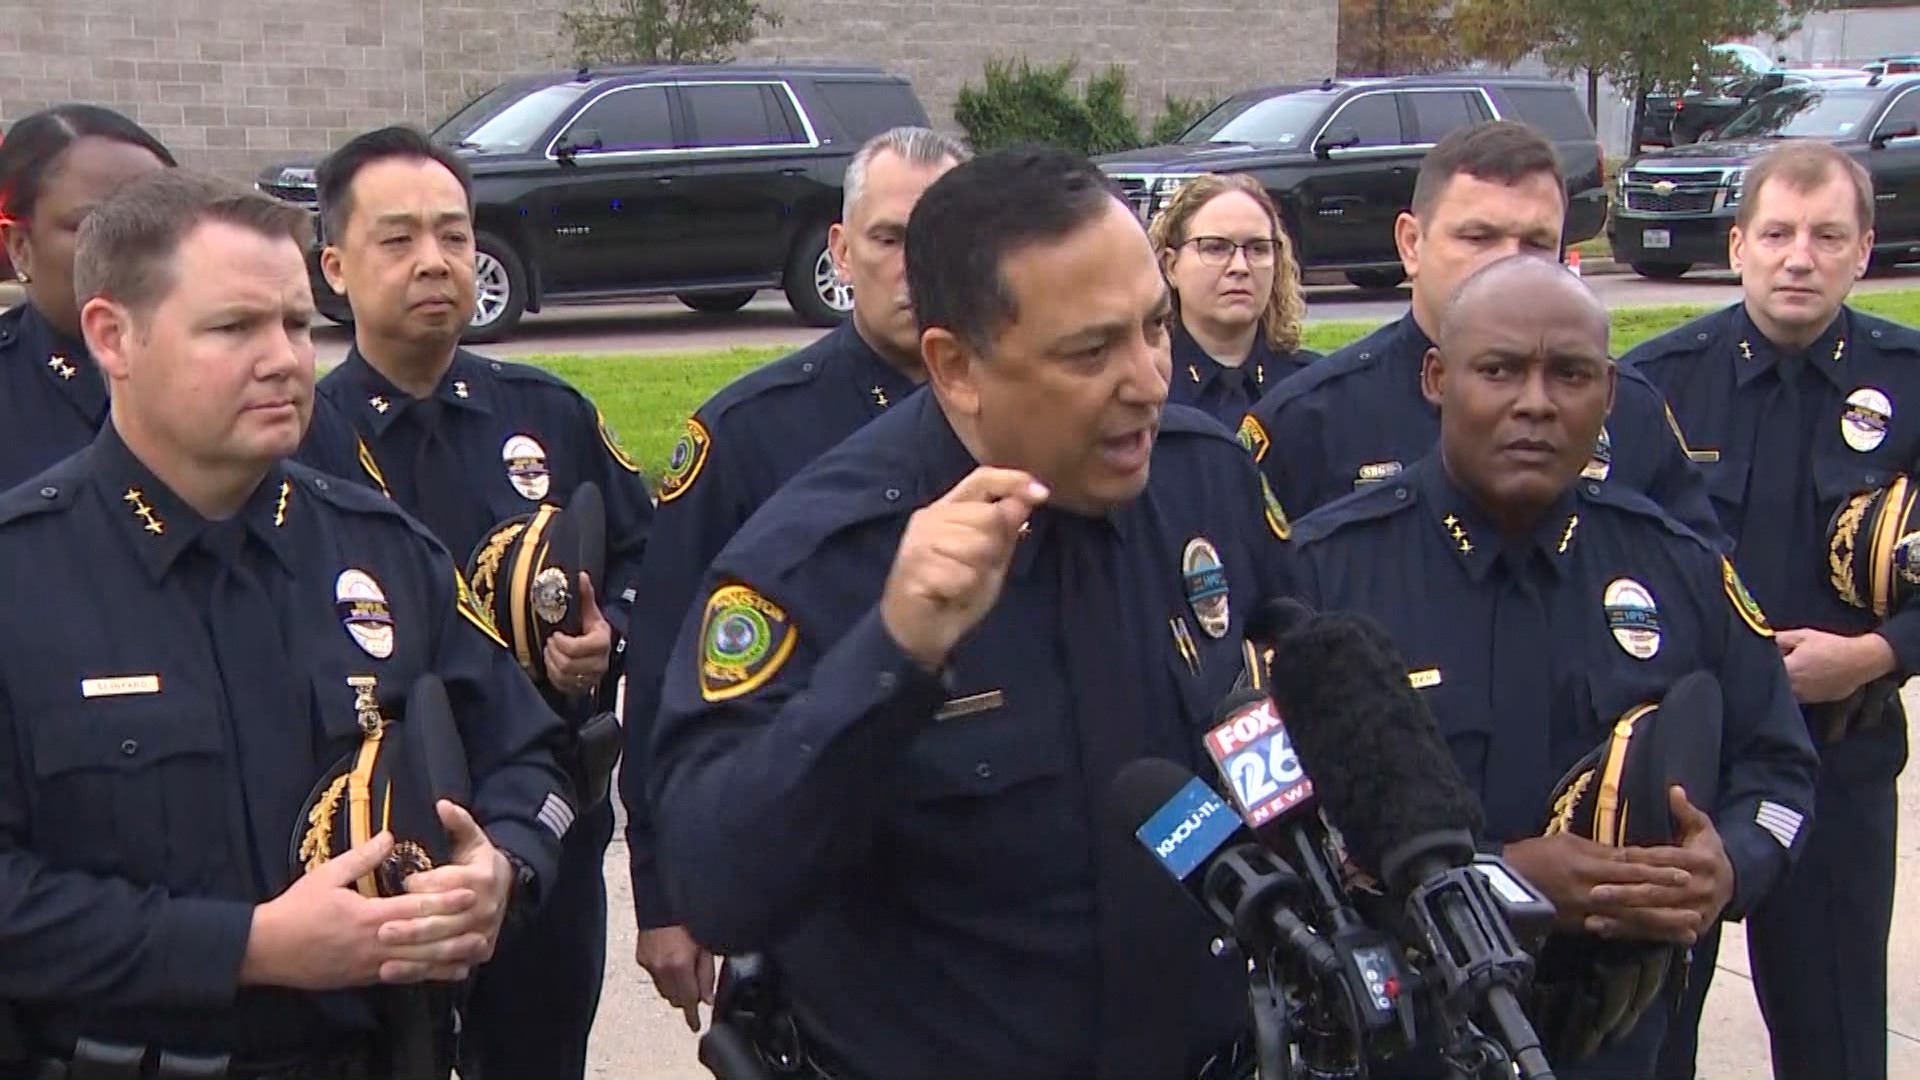 After a sergeant’s murder over the weekend, Houston Police Chief Art Acevedo calls out U.S. Senators and the NRA over the country’s gun laws.